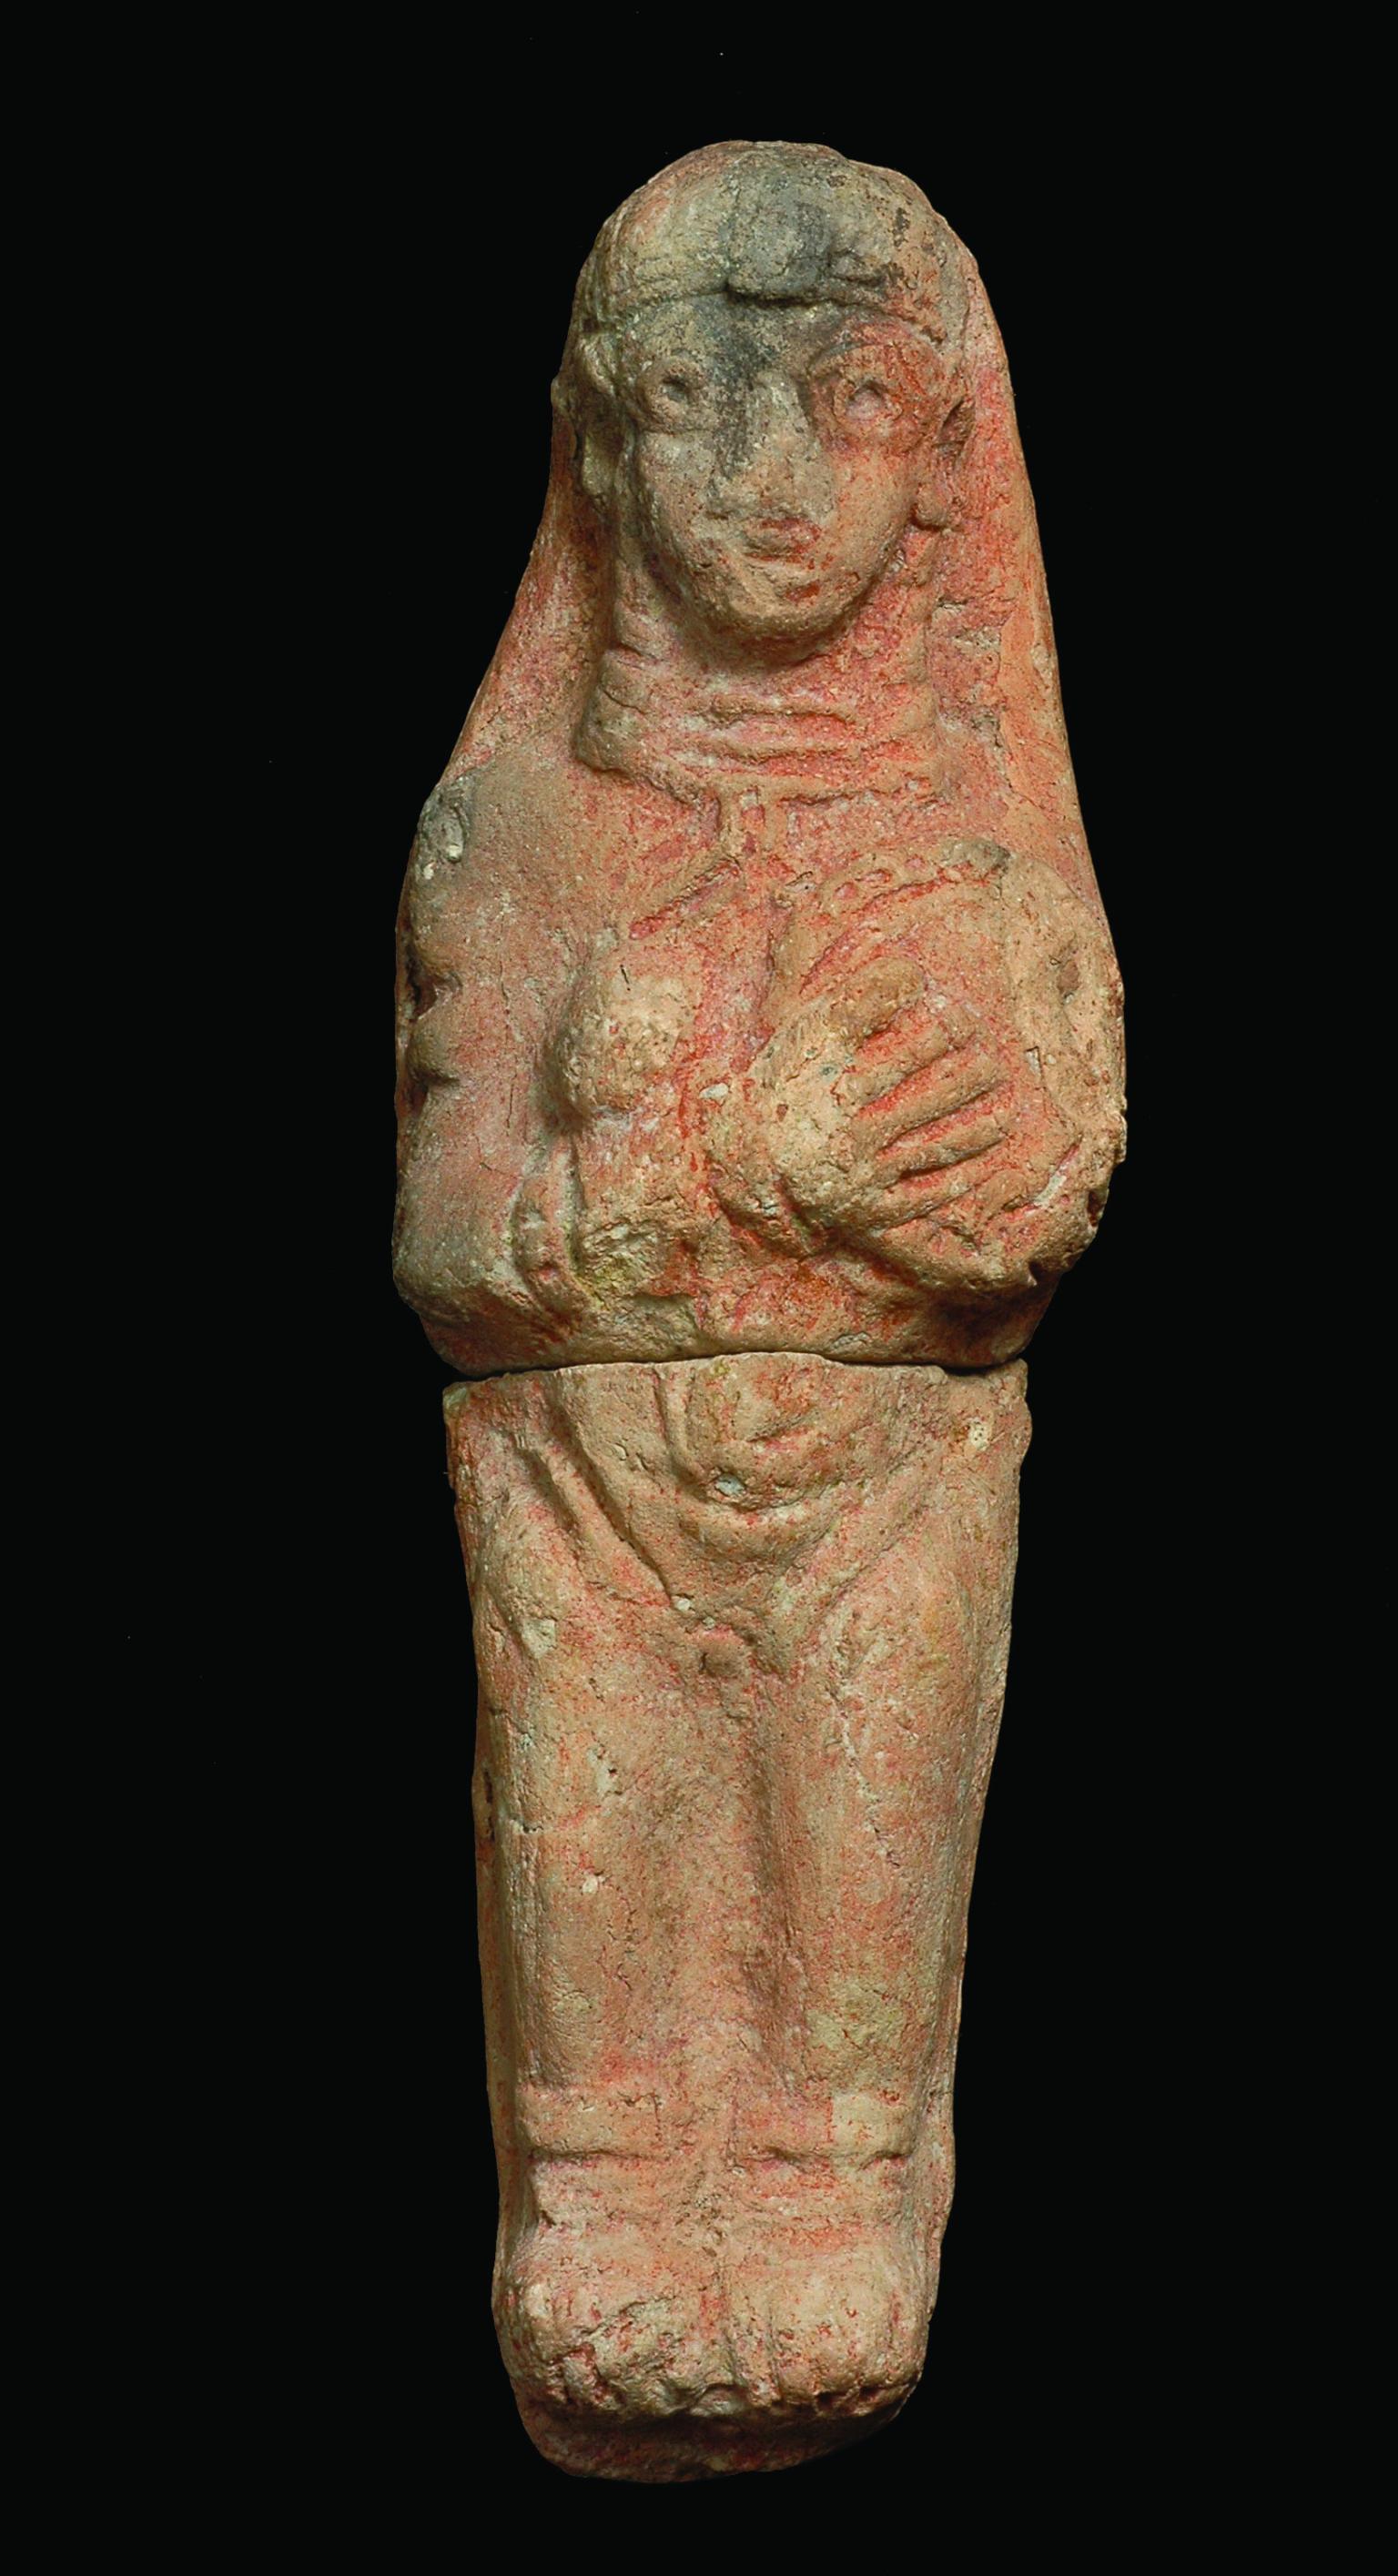 Terra-cotta figurine of woman wearing accessories holding a disk over left breast while right breast is exposed. 